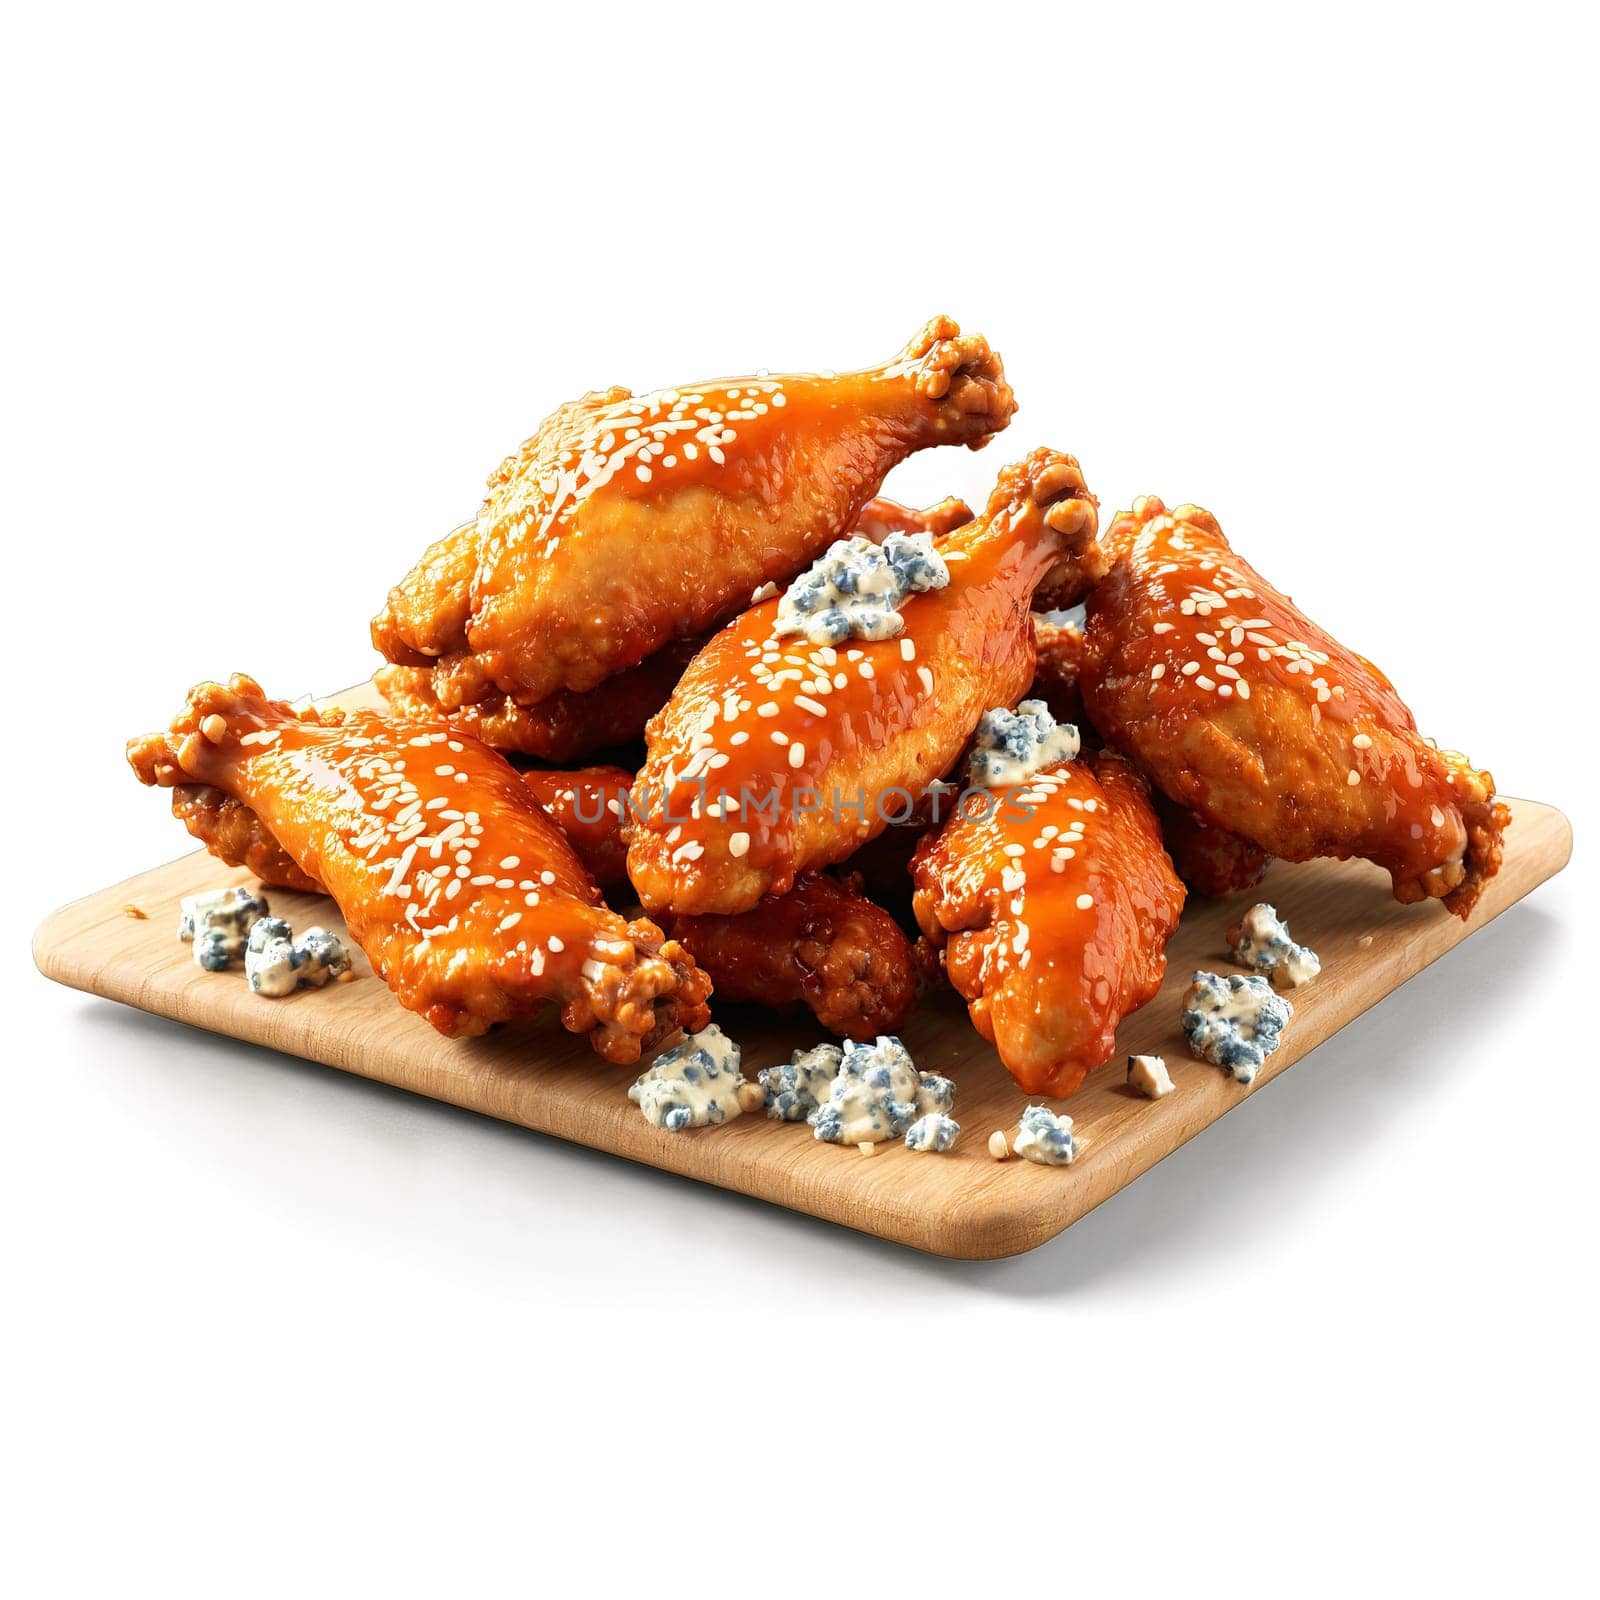 Chicken wings raw and plump with buffalo sauce and blue cheese crumbles tumbling in by panophotograph